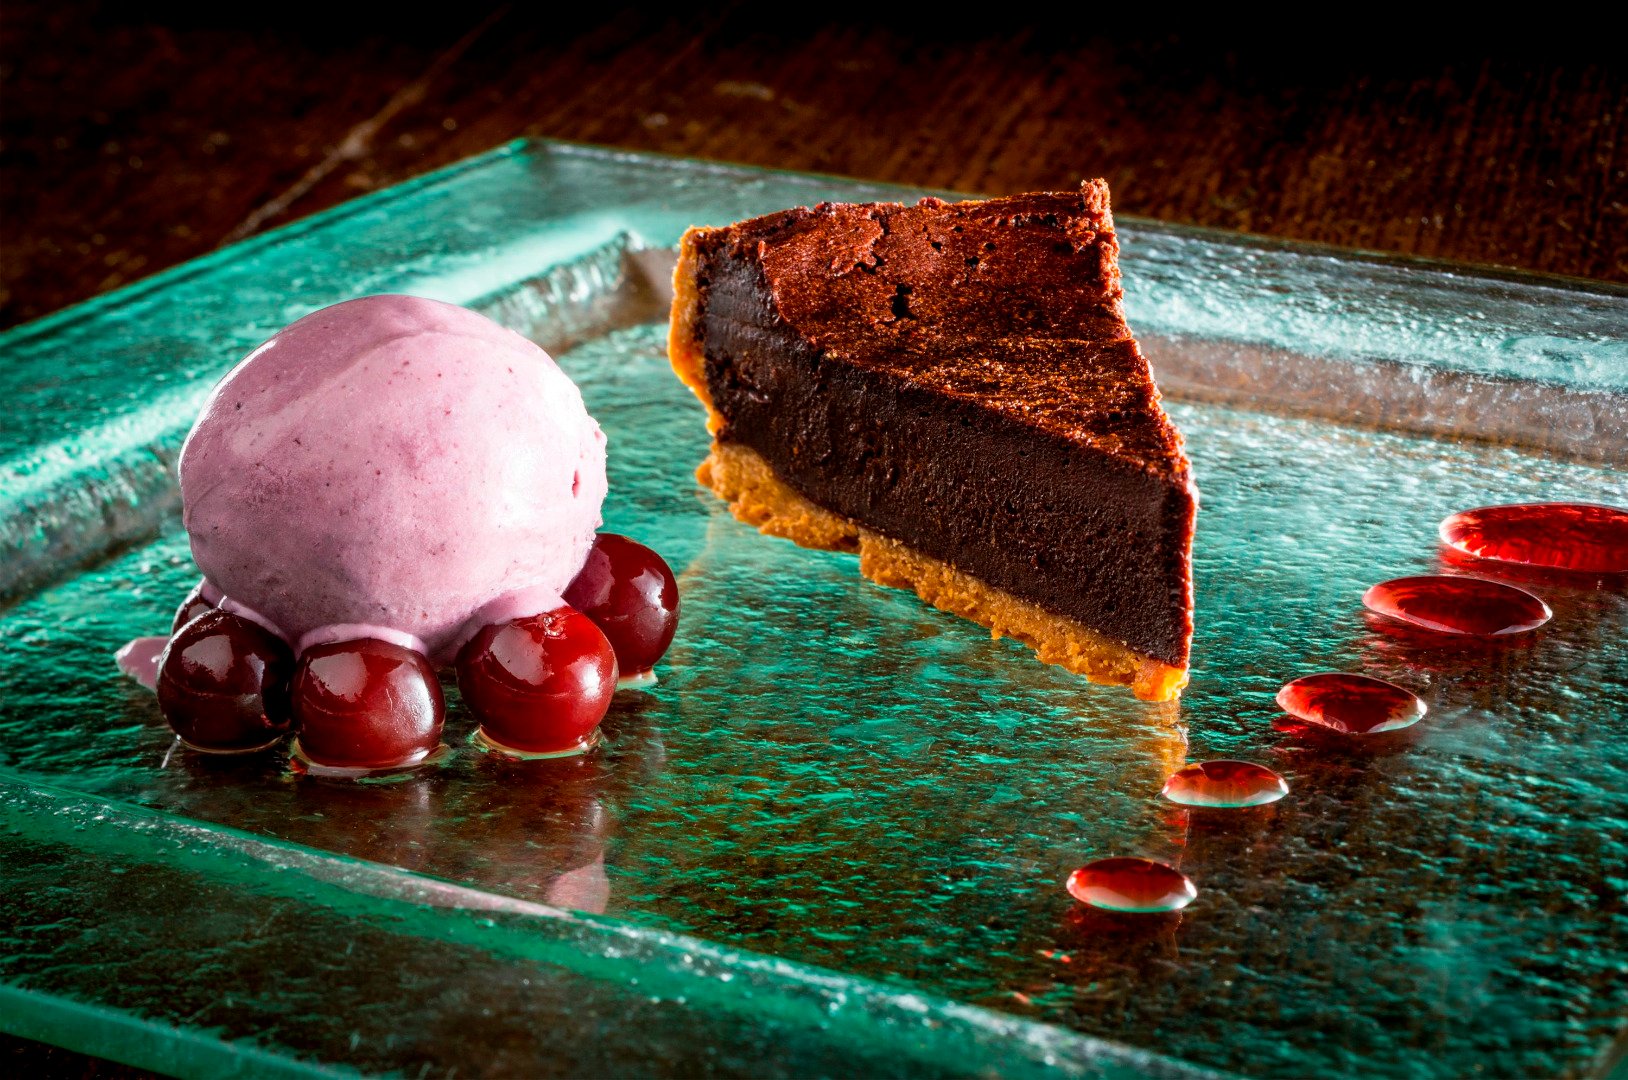 Image name homemade chocolate tart with cherry ice cream cherries the blue lion inn east witton the good pub guide inn of the year 20141 the 5 image from the post Eating out in the Yorkshire Dales in Yorkshire.com.